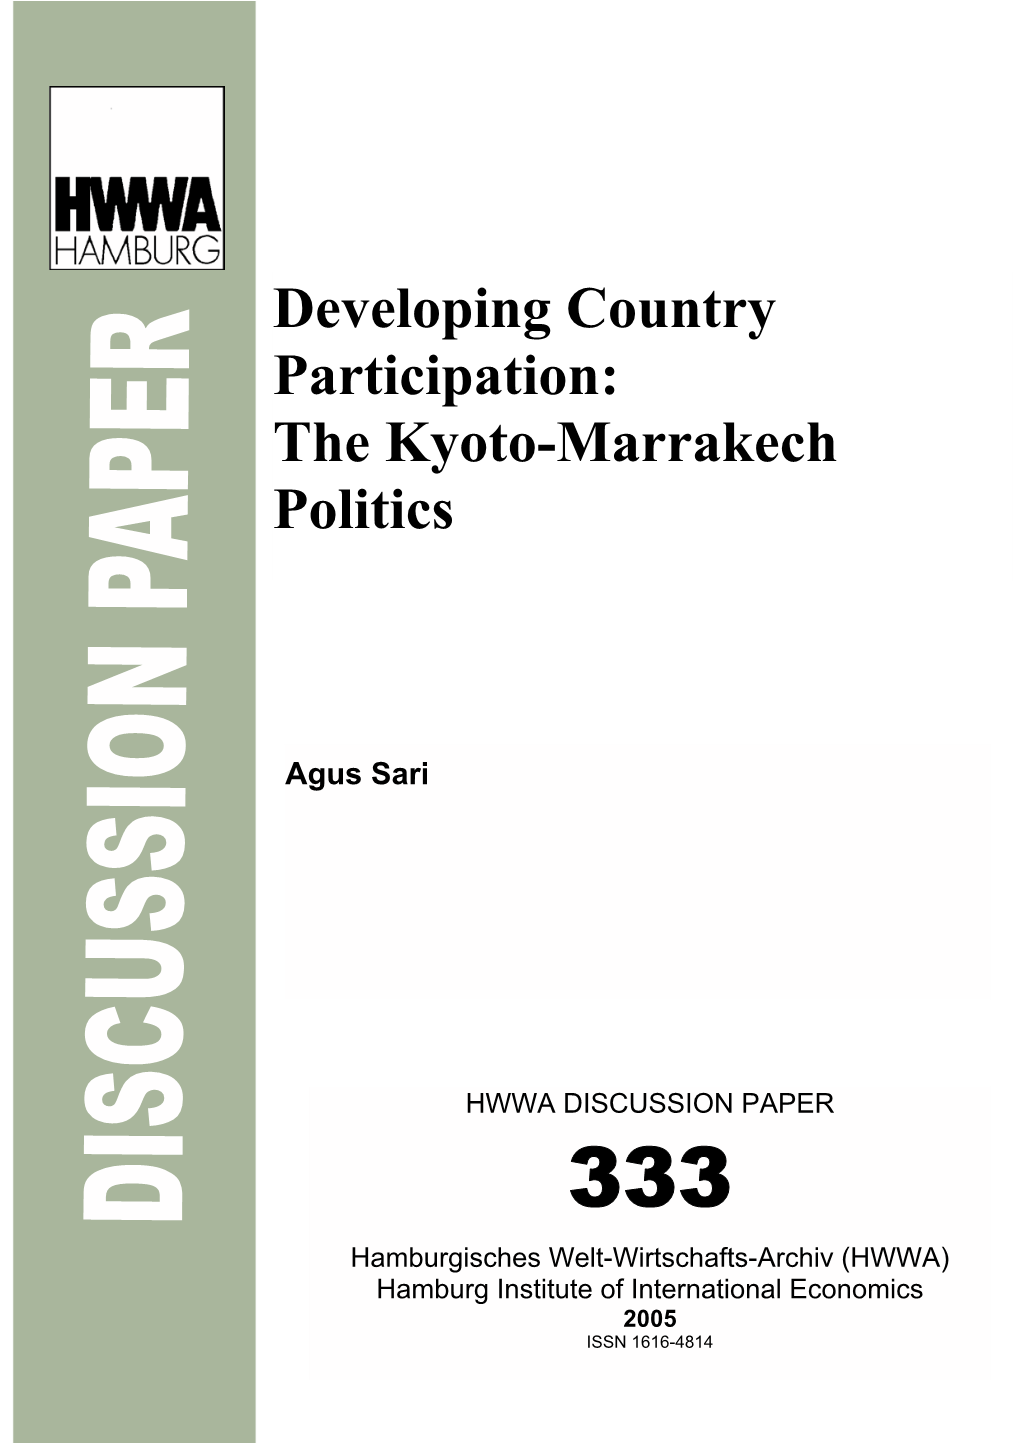 Developing Country Participation: the Kyoto-Marrakech Politics